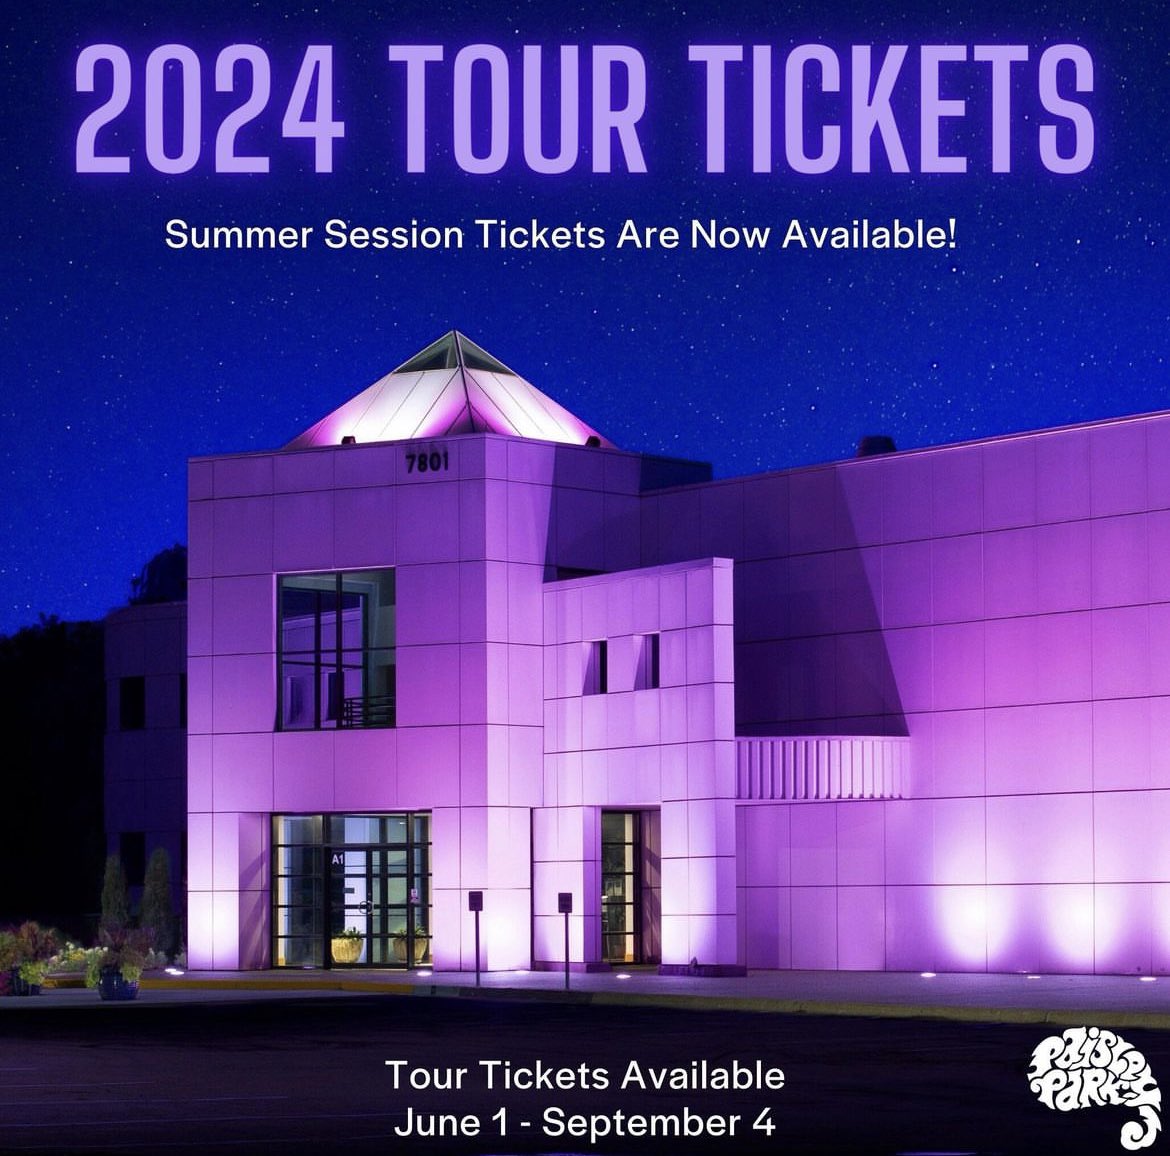 PAISLEY PARK Summer Session Tour Tickets Are Available NOW 💜 June 1 - September 4. See you at The Park! 💜☔️ showclix.com/tickets/visitp… #paisleypark #tours #prince4ever